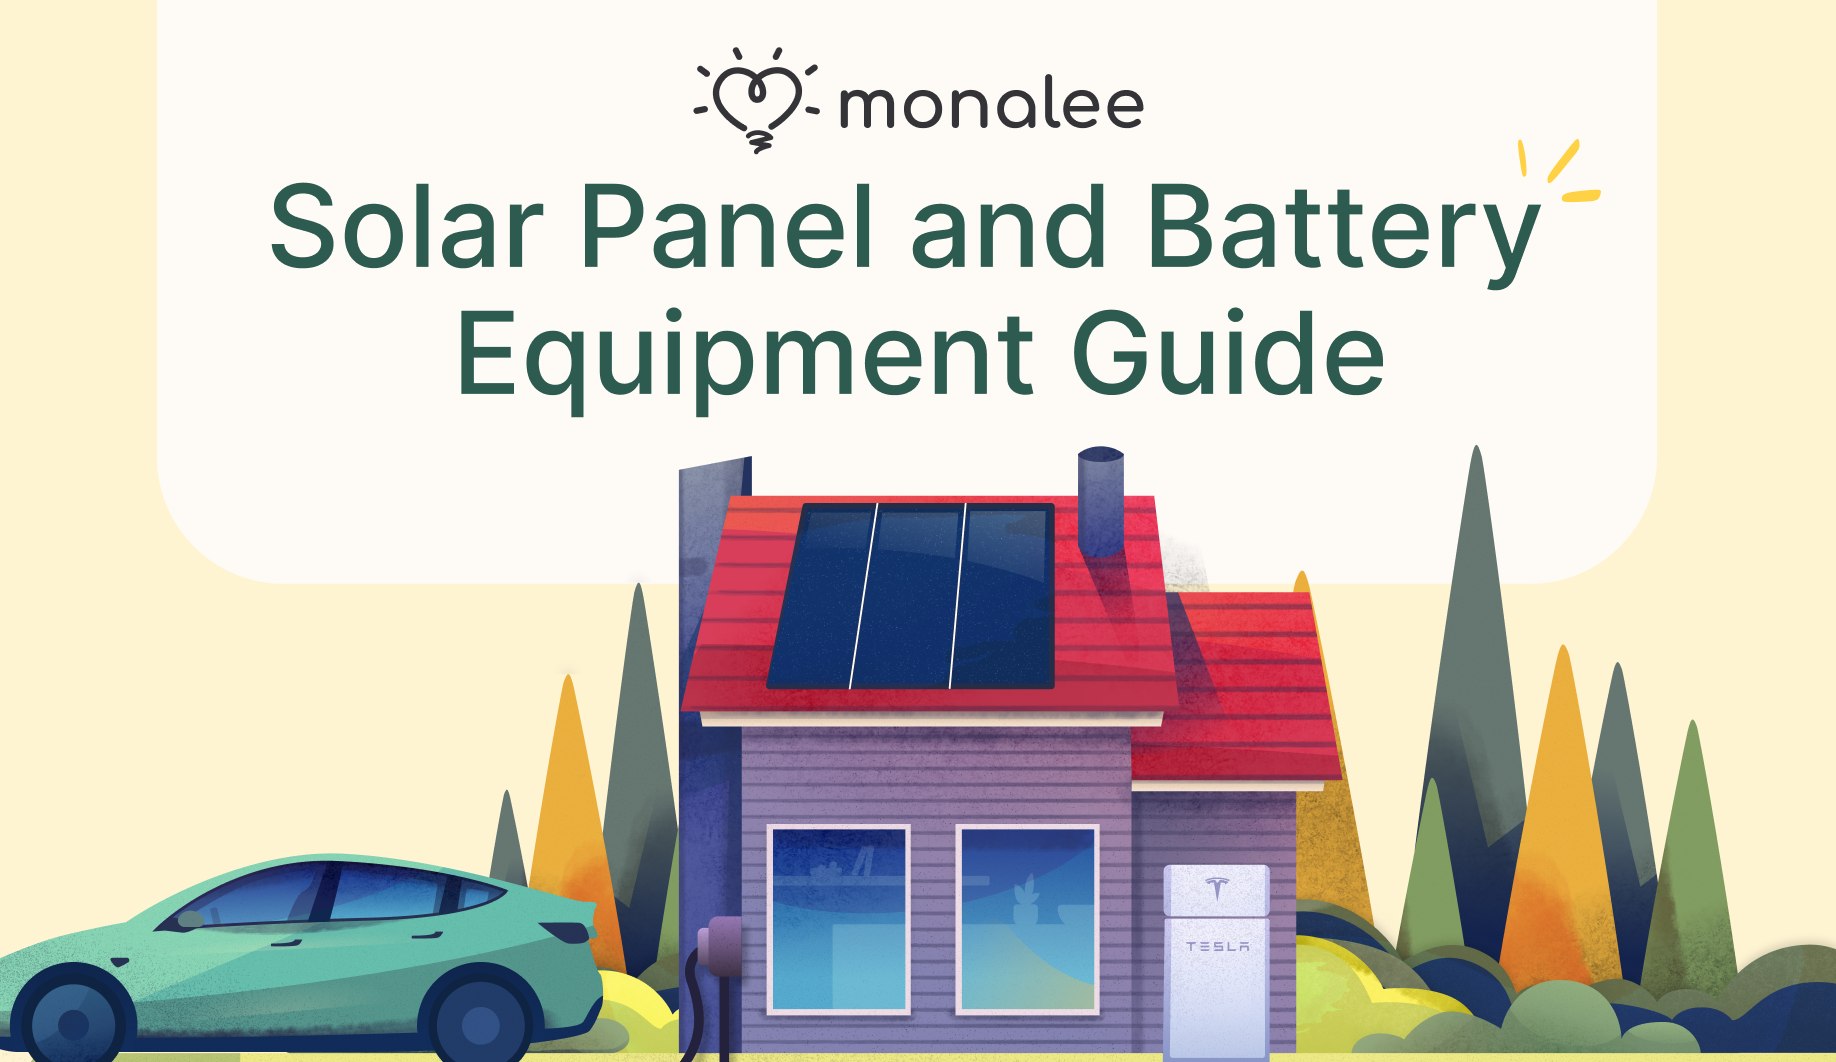 Monalee Solar Panel and Battery Equipment Guide